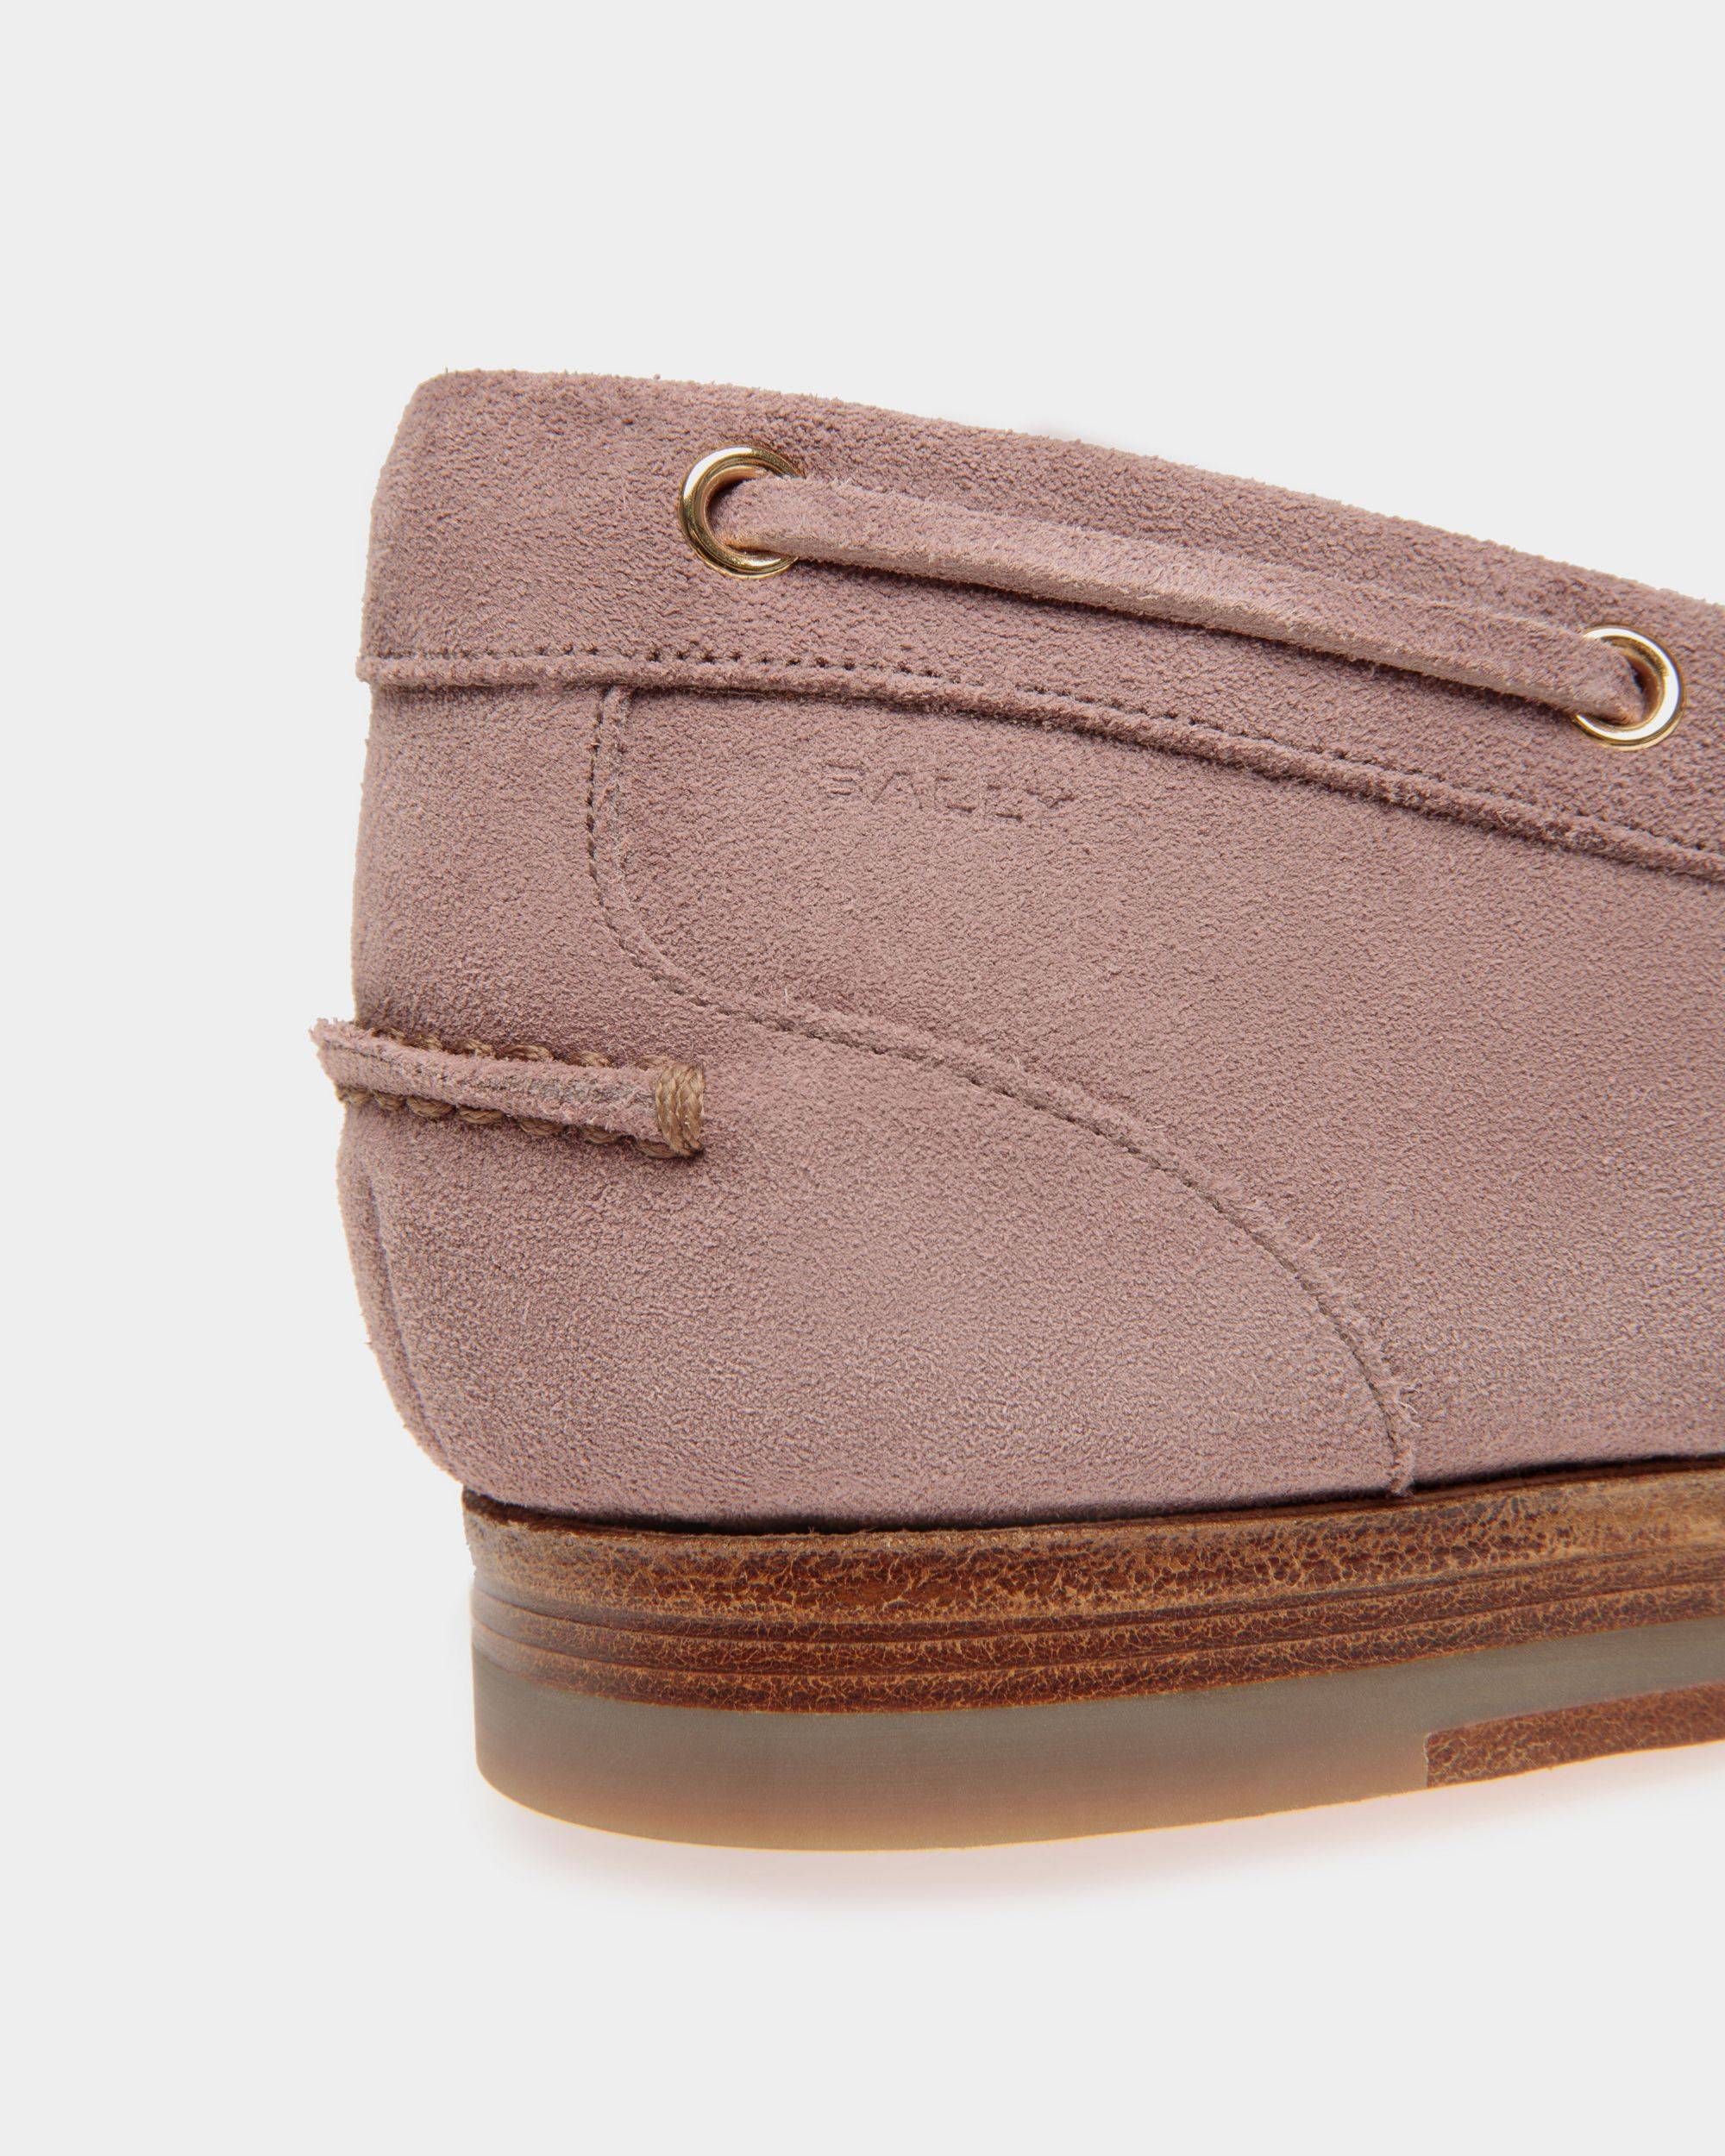 Plume | Men's Moccasin in Light Mauve Suede| Bally | Still Life Detail